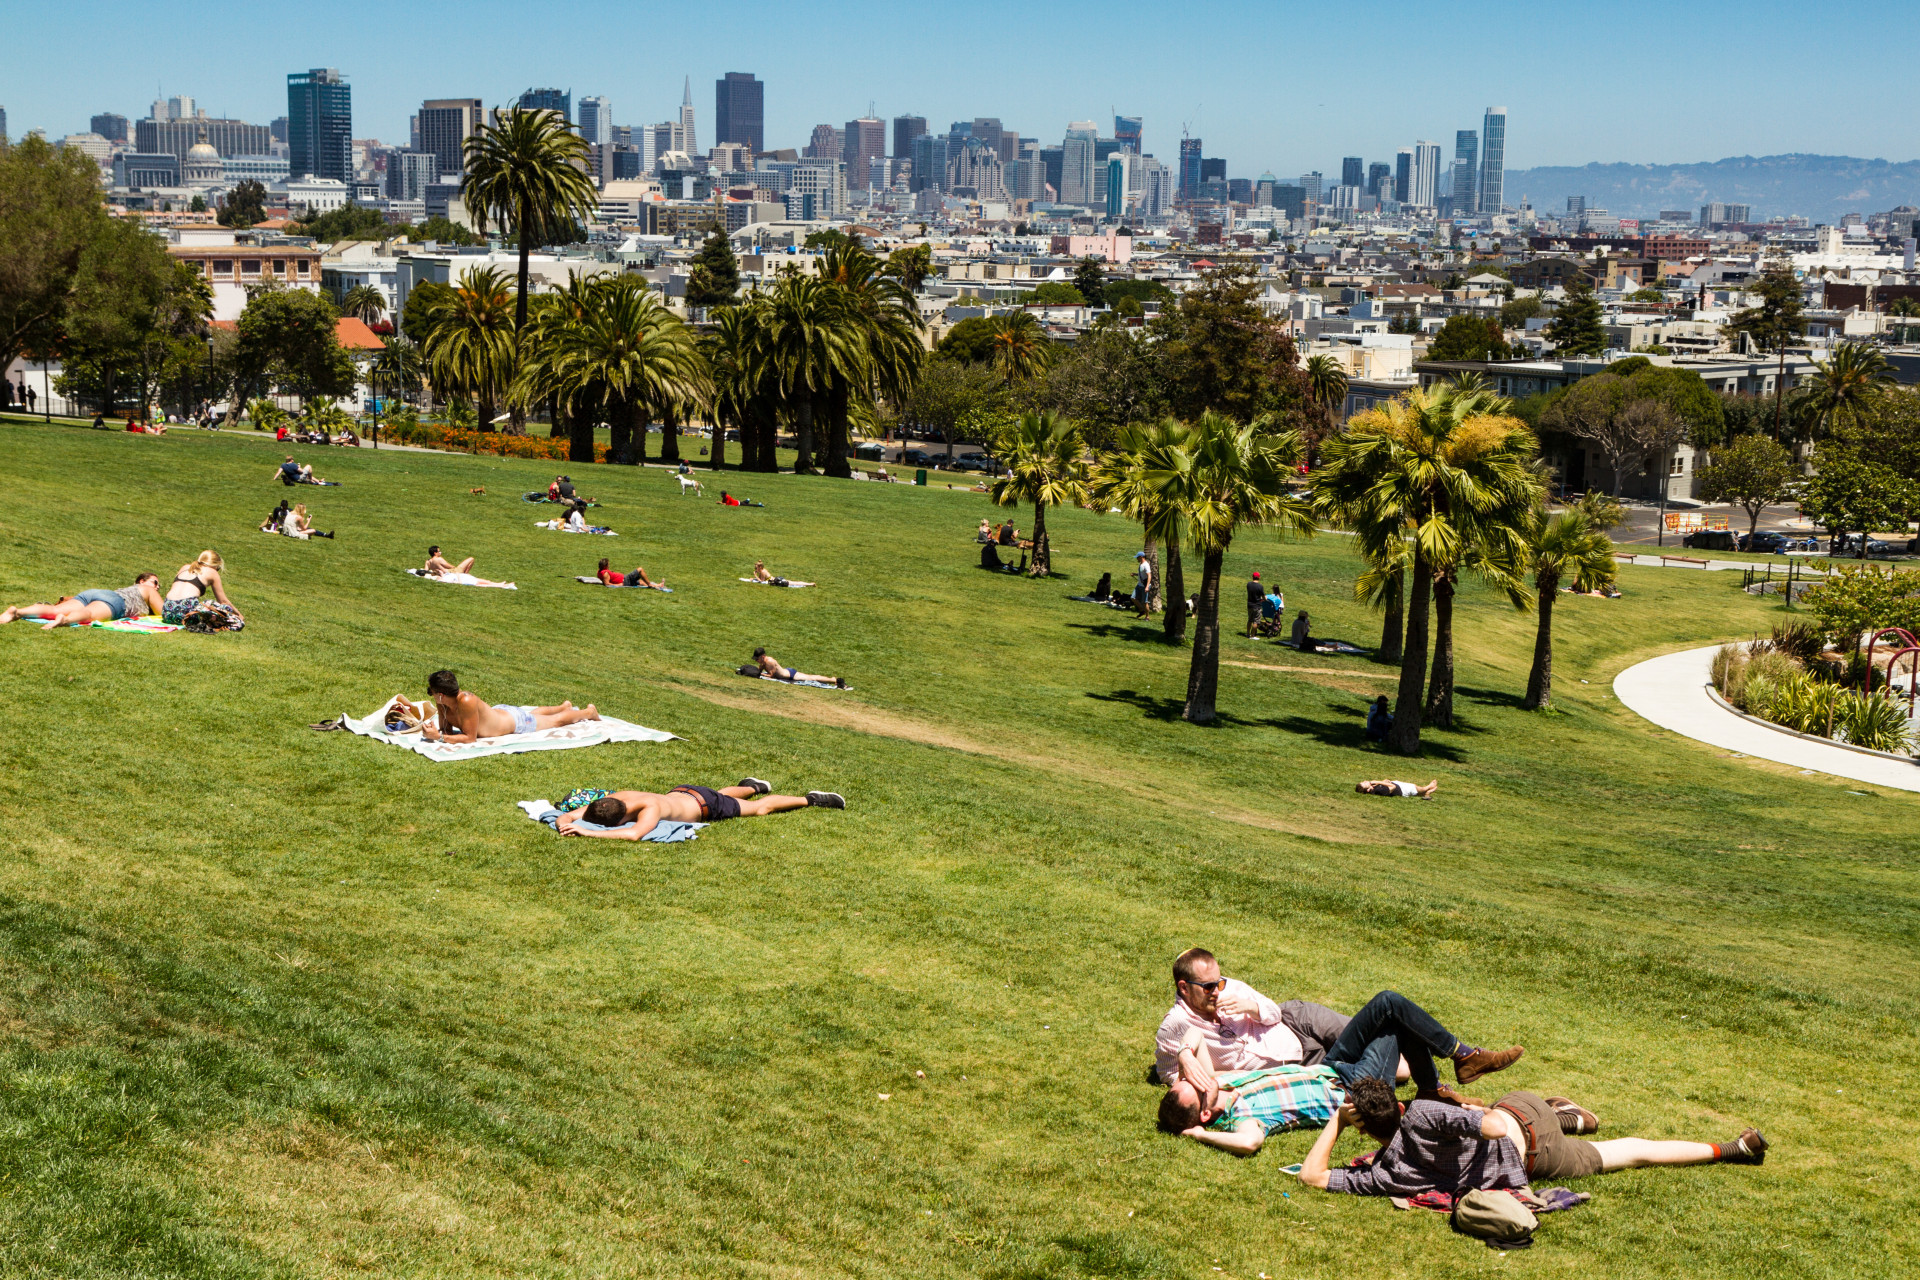 Have a picnic at Dolores Park.<p><a href="https://www.msn.com/en-us/community/channel/vid-7xx8mnucu55yw63we9va2gwr7uihbxwc68fxqp25x6tg4ftibpra?cvid=94631541bc0f4f89bfd59158d696ad7e">Follow us and access great exclusive content every day</a></p>